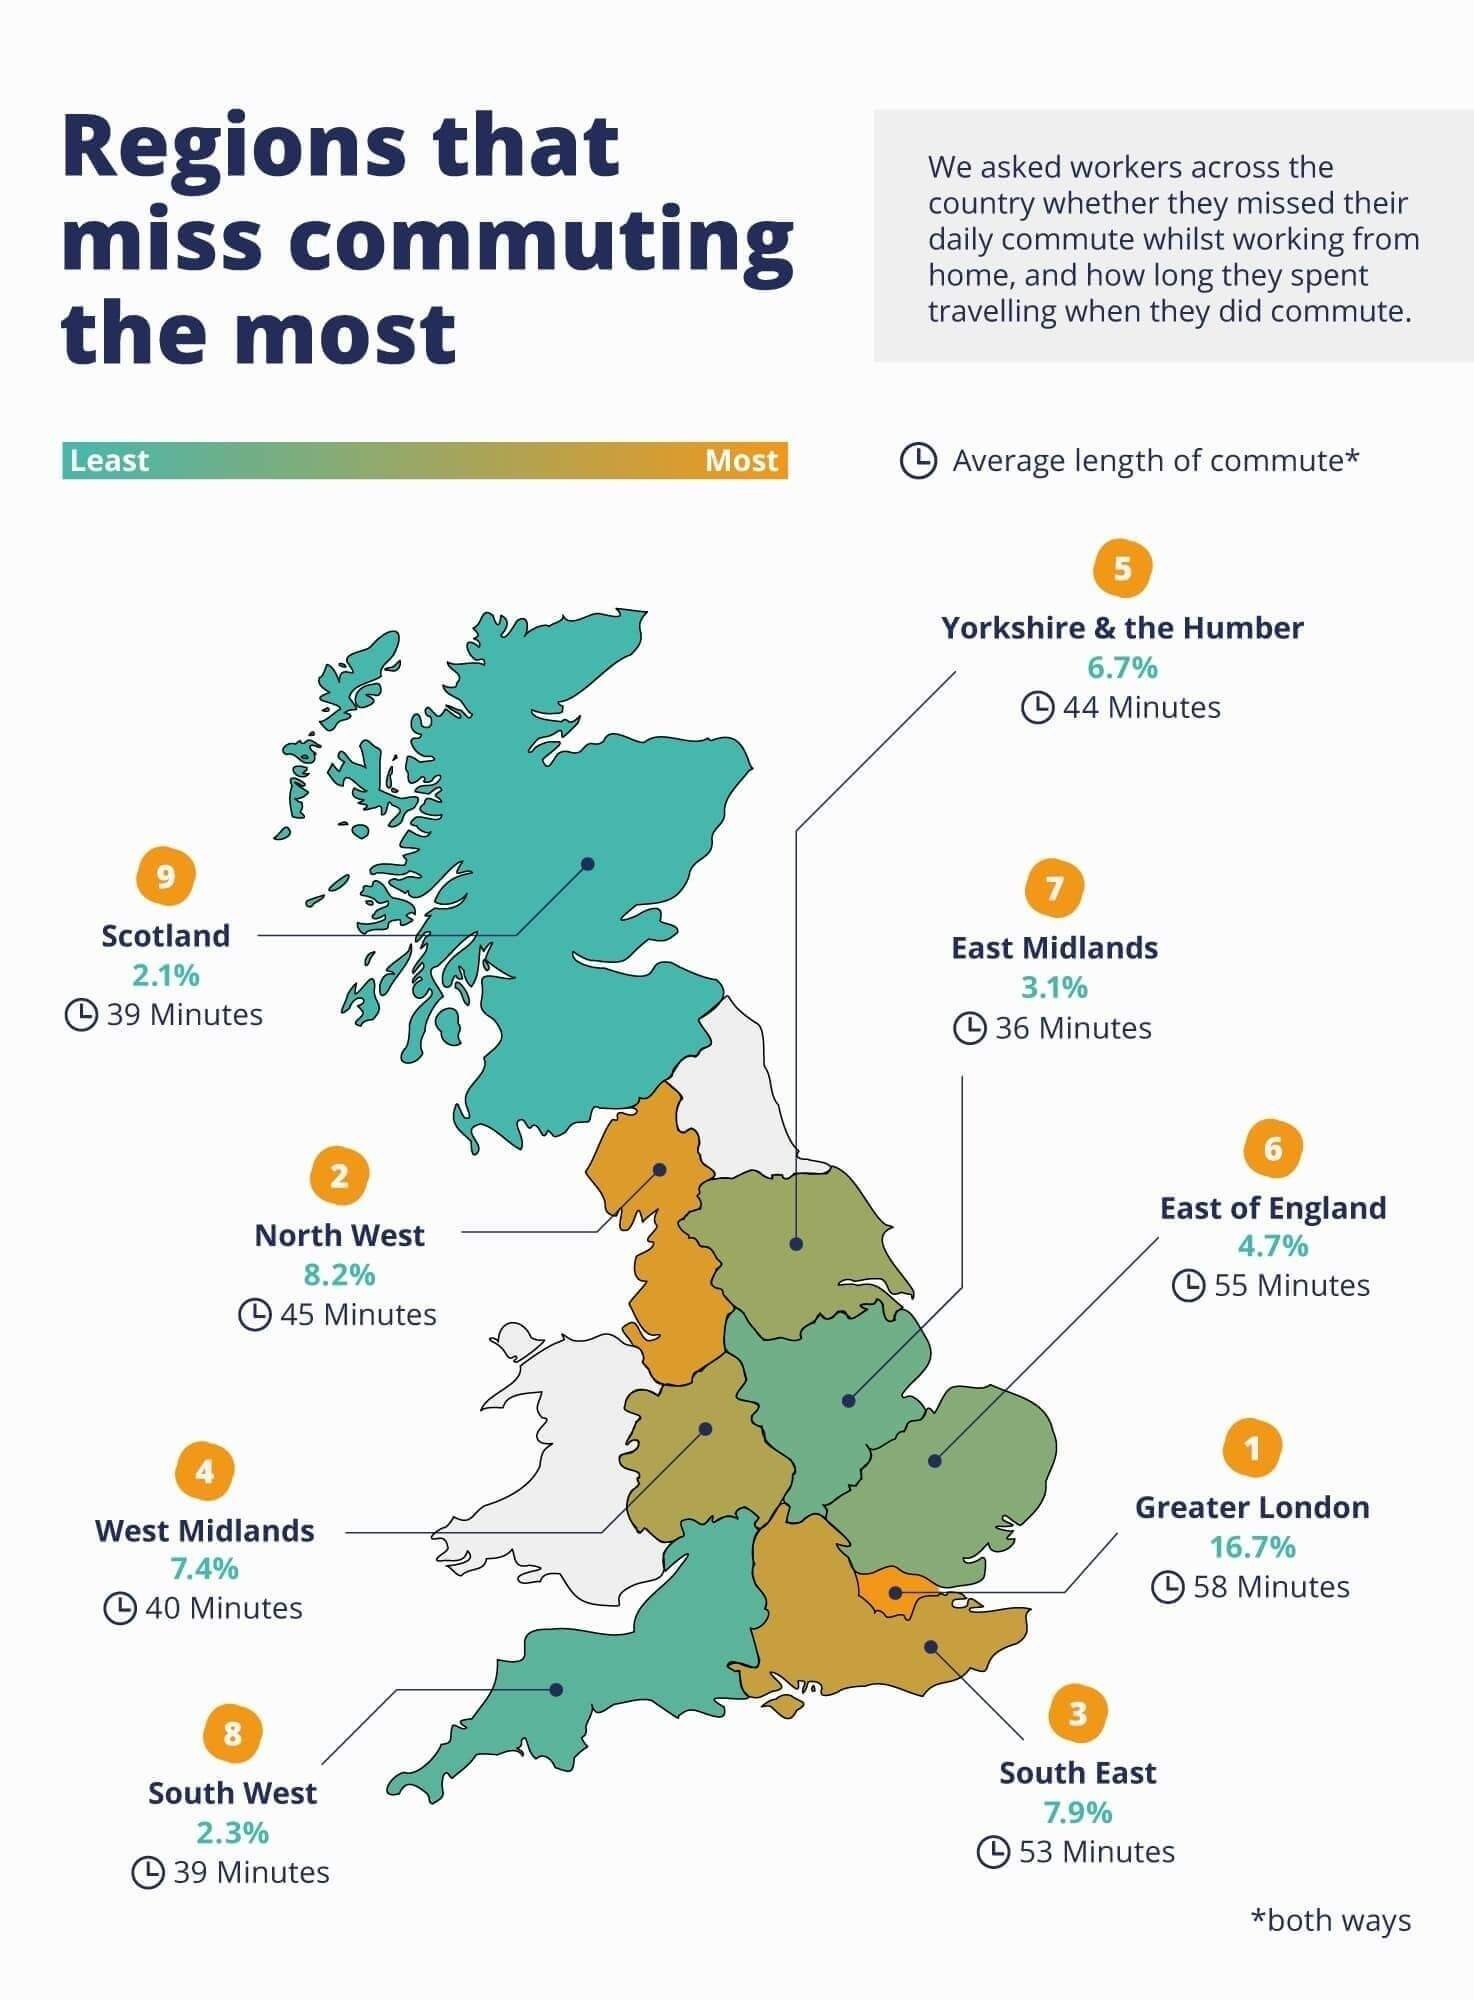 Map revealing which regions in the UK missed commuting the most